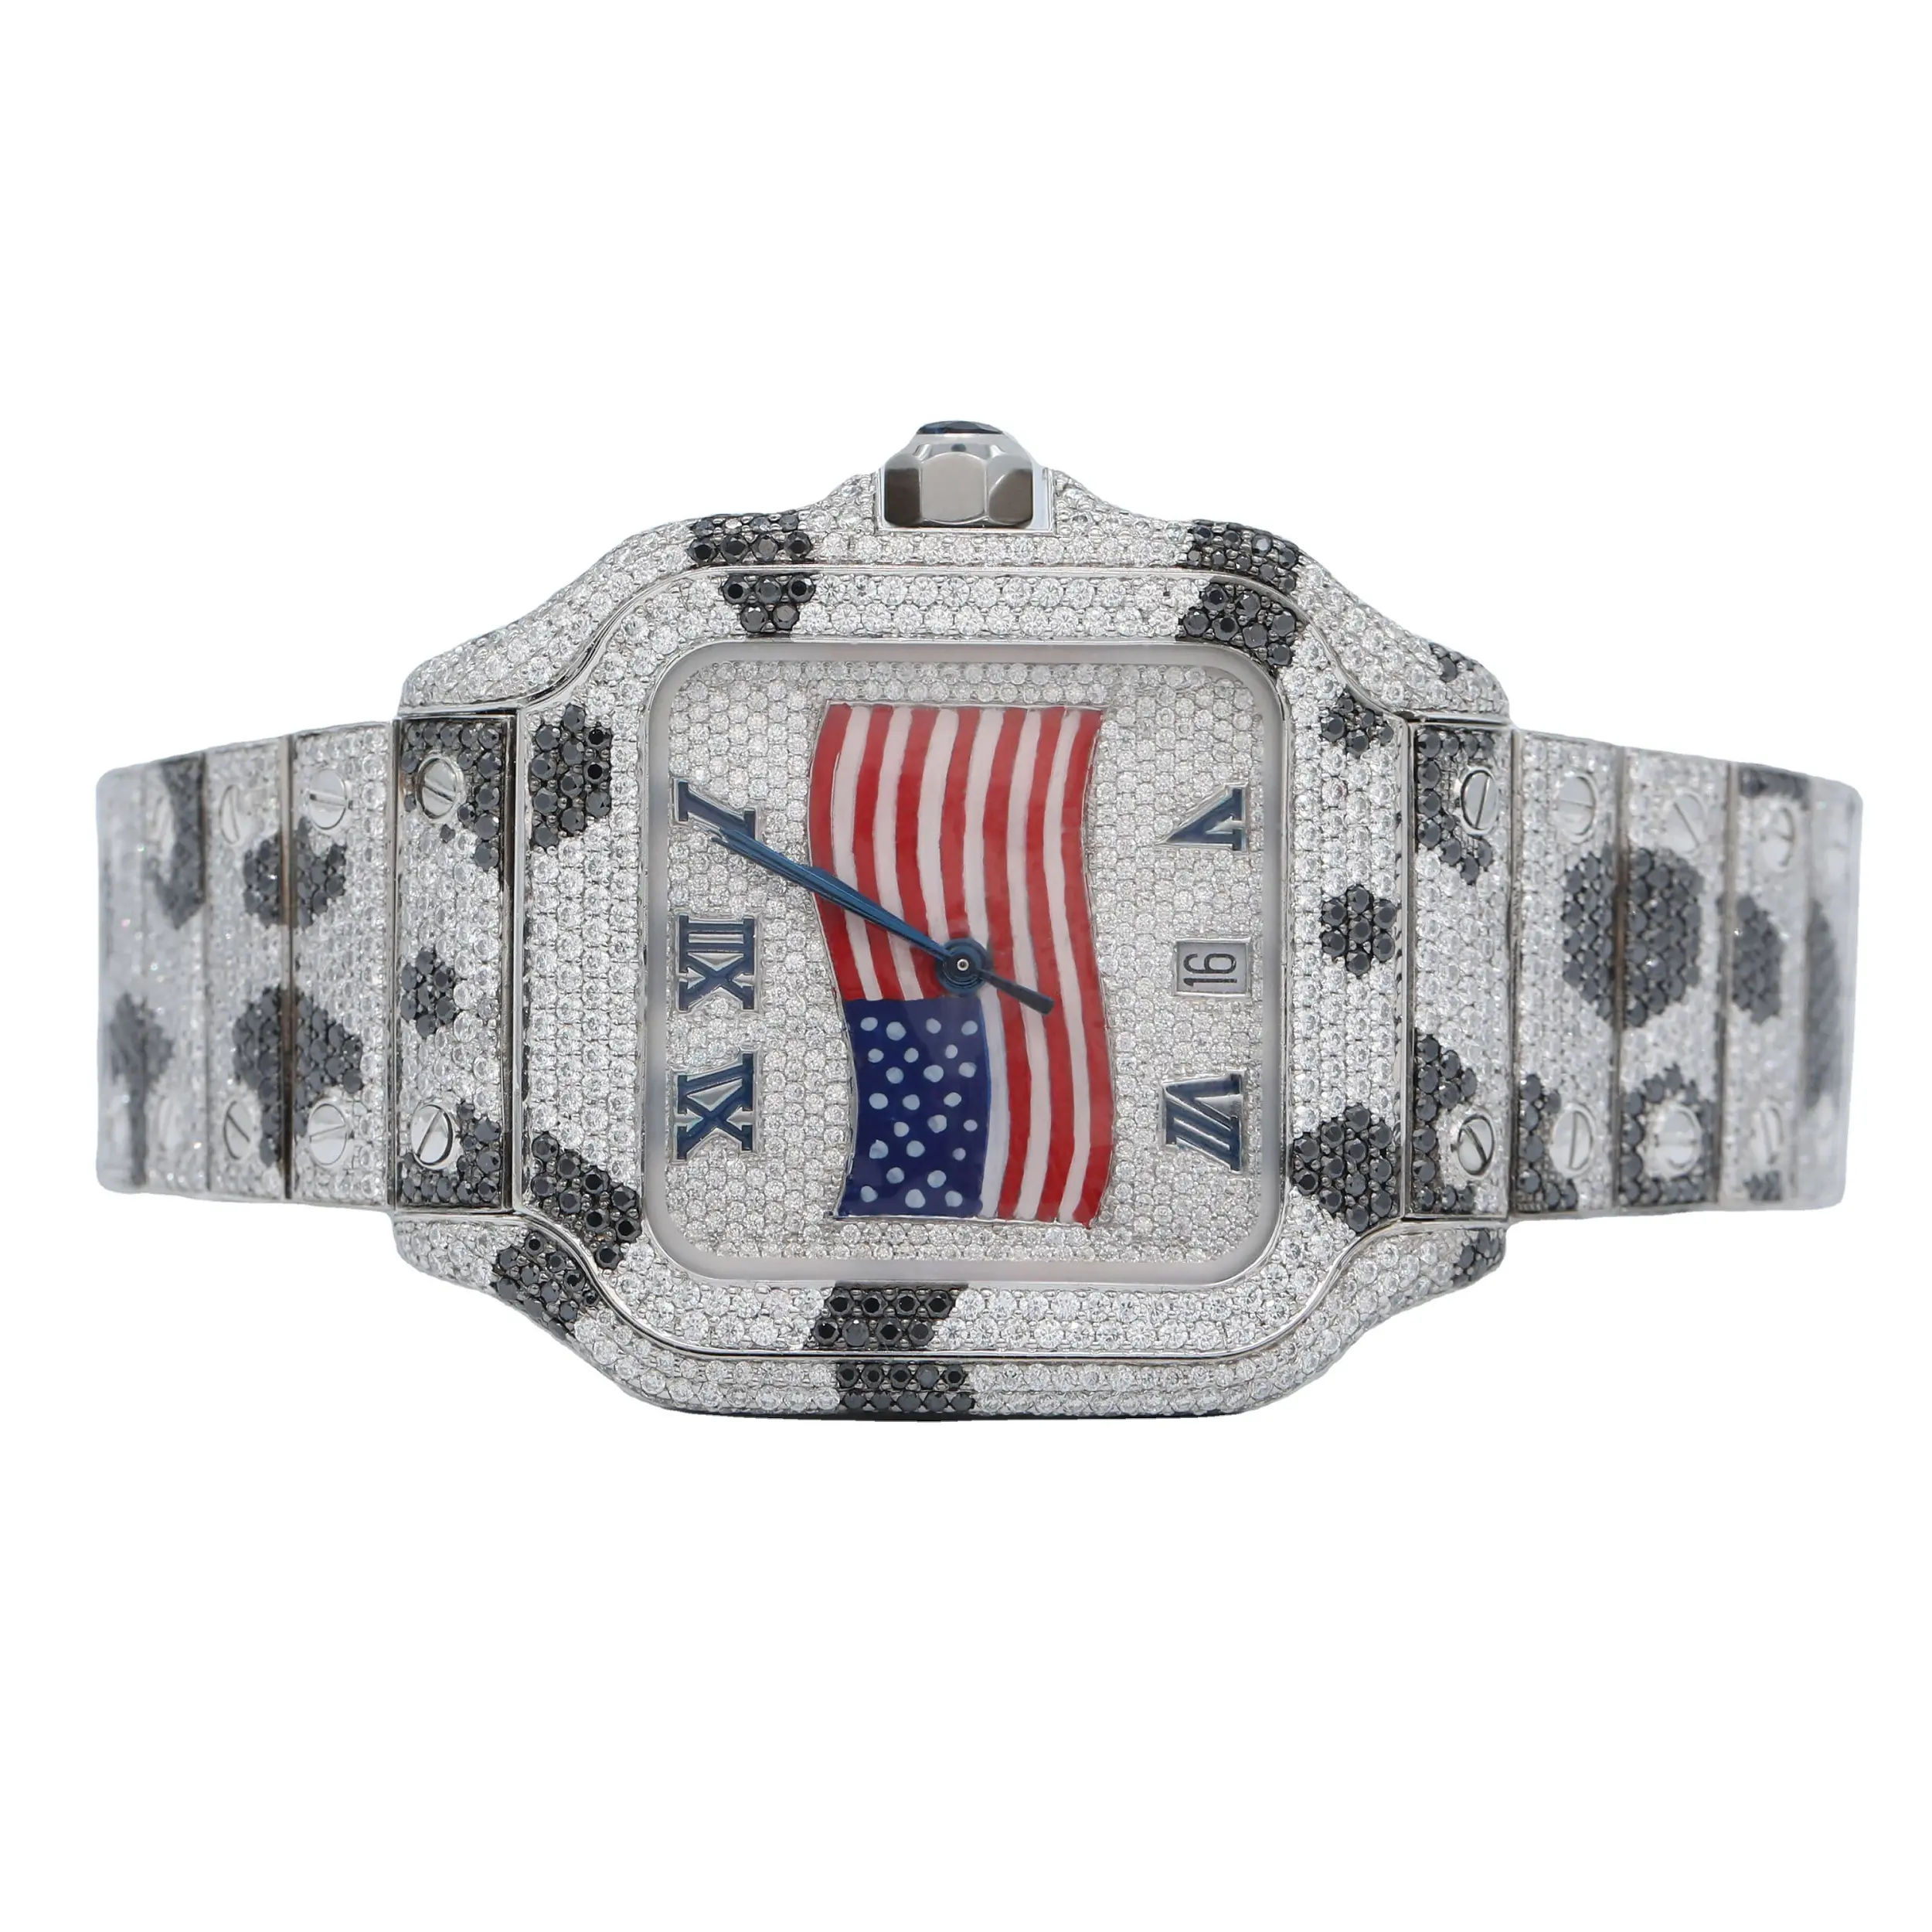 Limited Edition Bicolor Natural Diamond Zebra Print Hip Hop Icy Watch with USA Flag Dial Featuring for Men